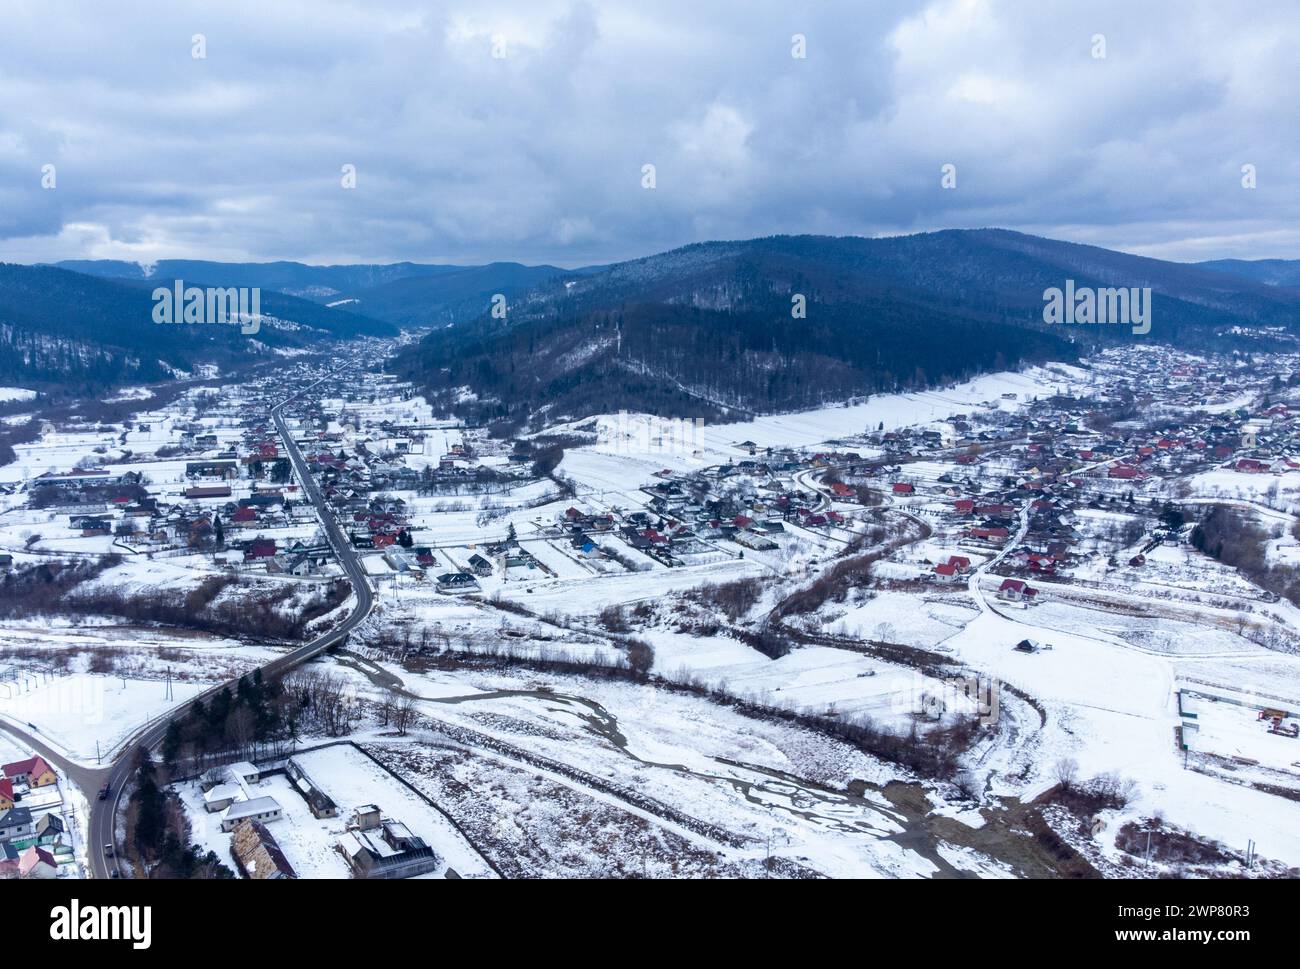 An Aerial view of Marginea village in Suceava county - Romania Stock Photo